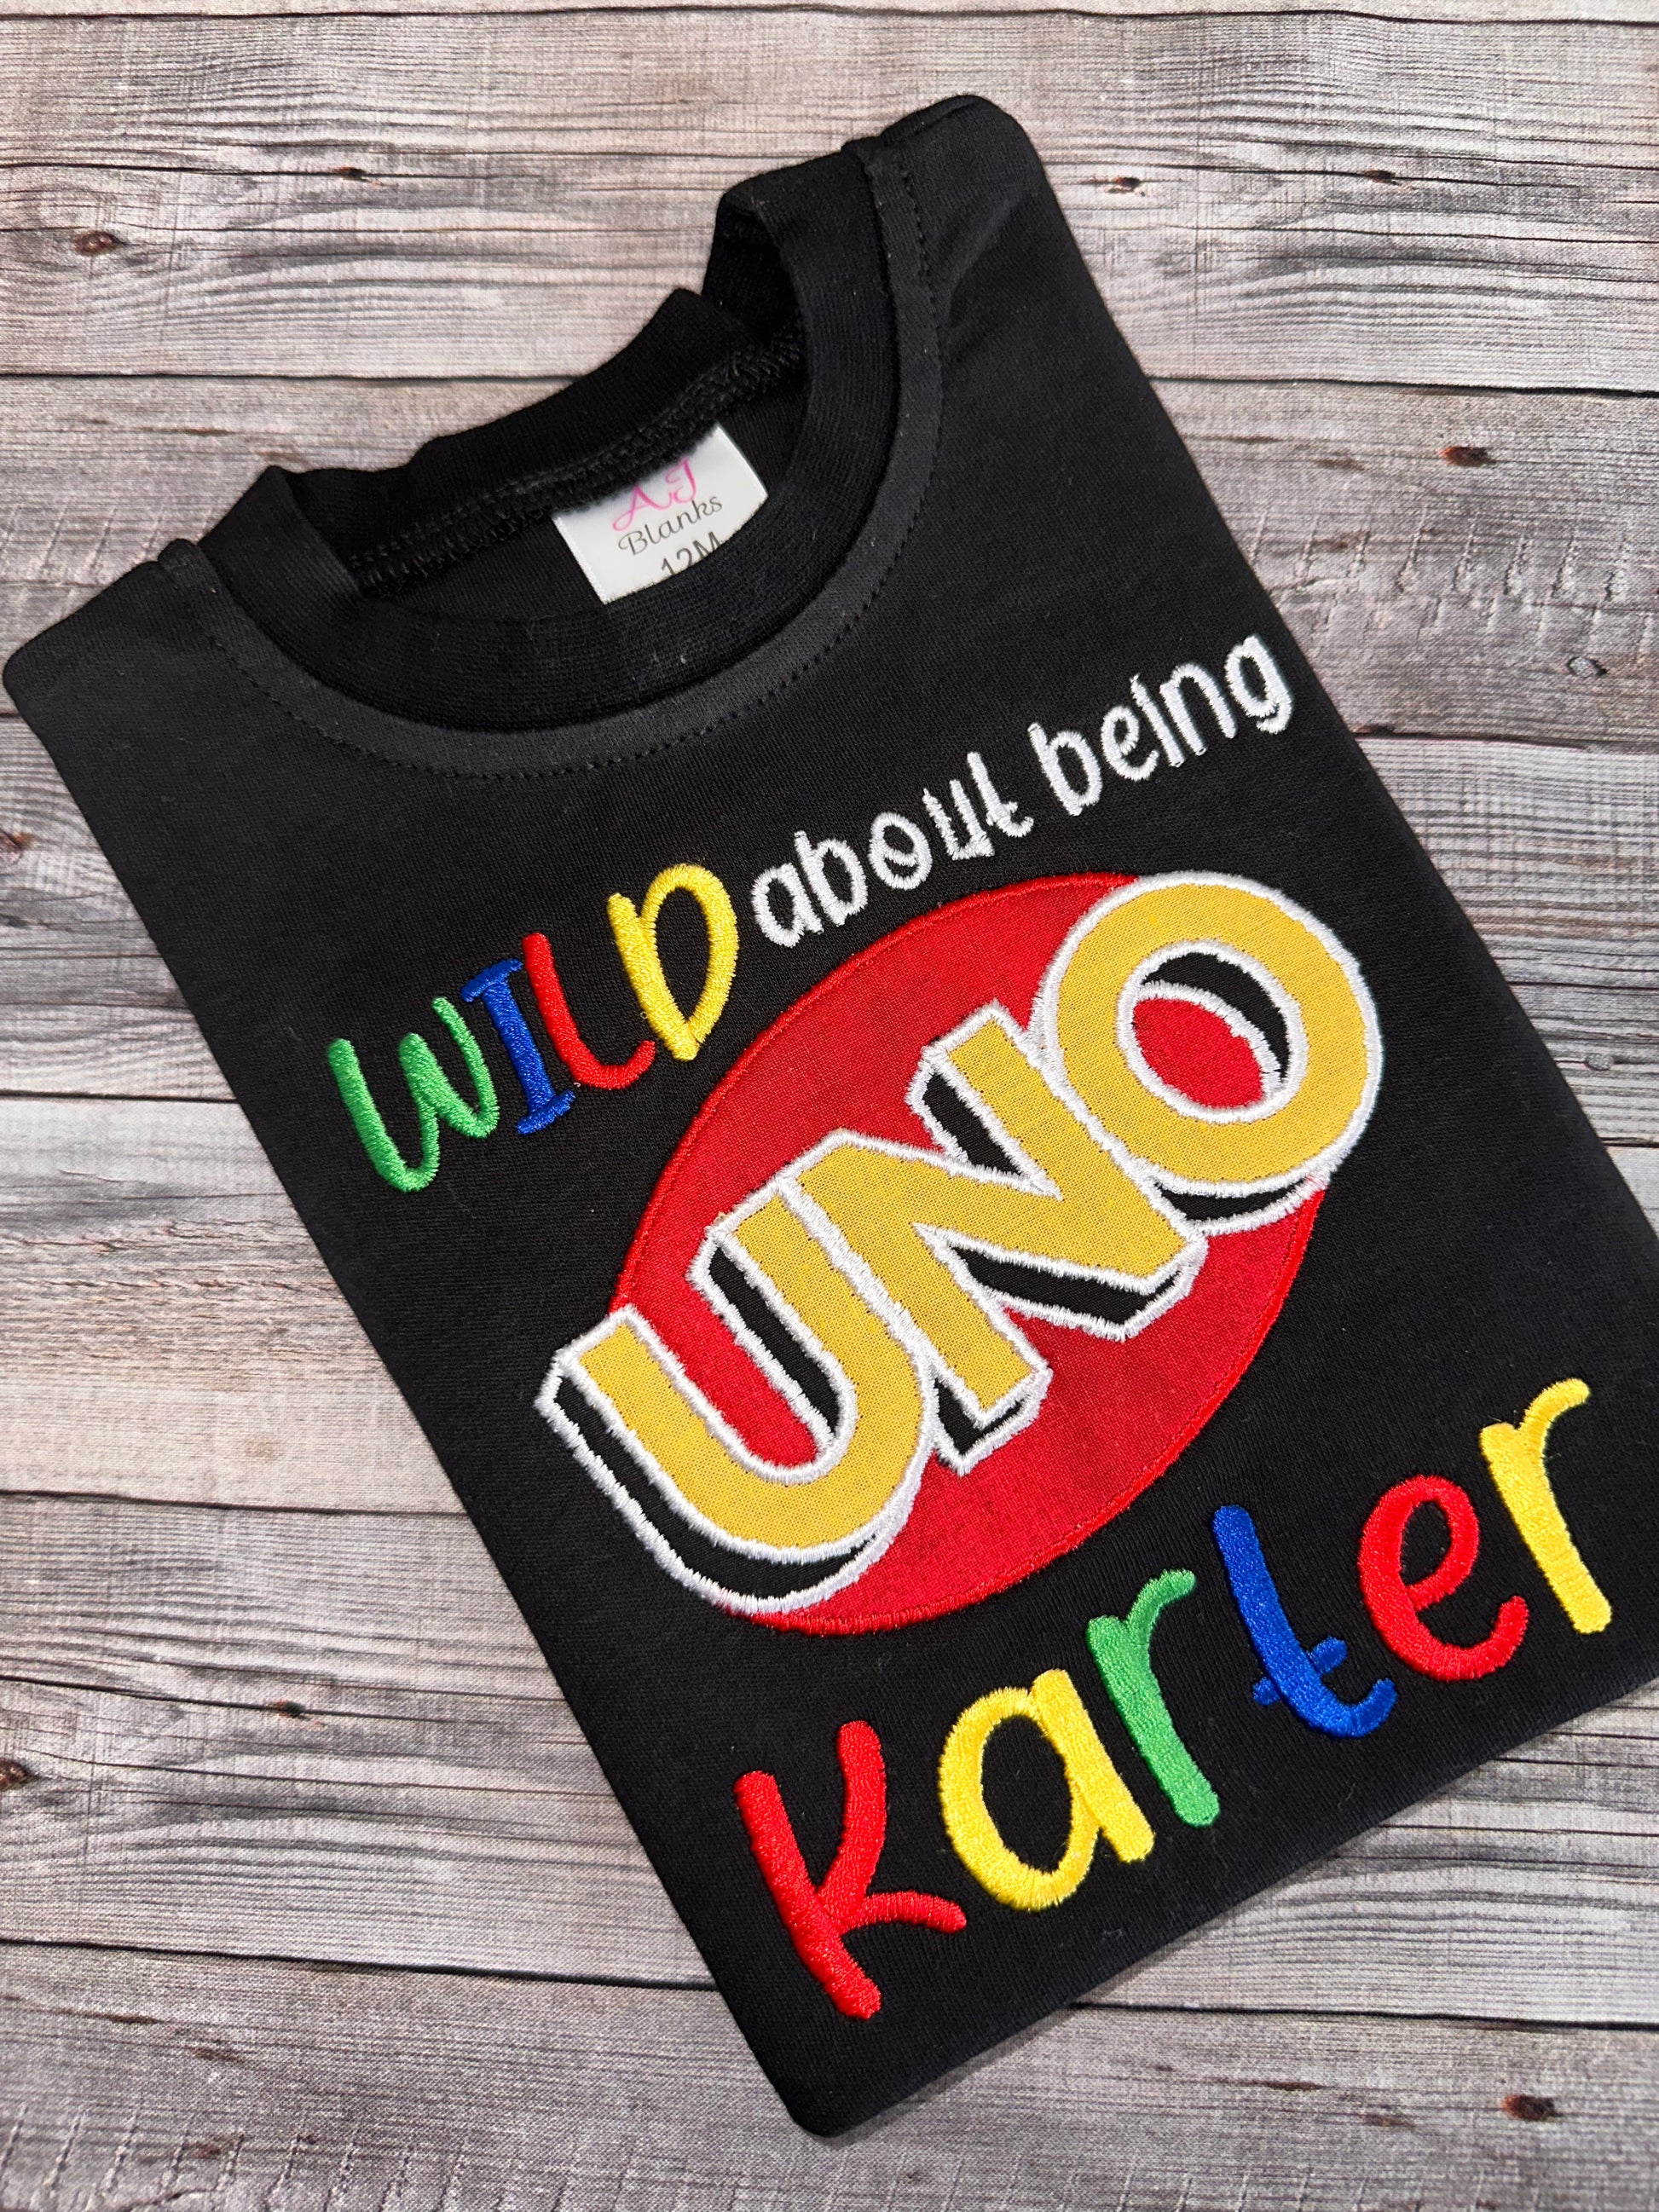 Wild about being Uno Birthday shirt for boys